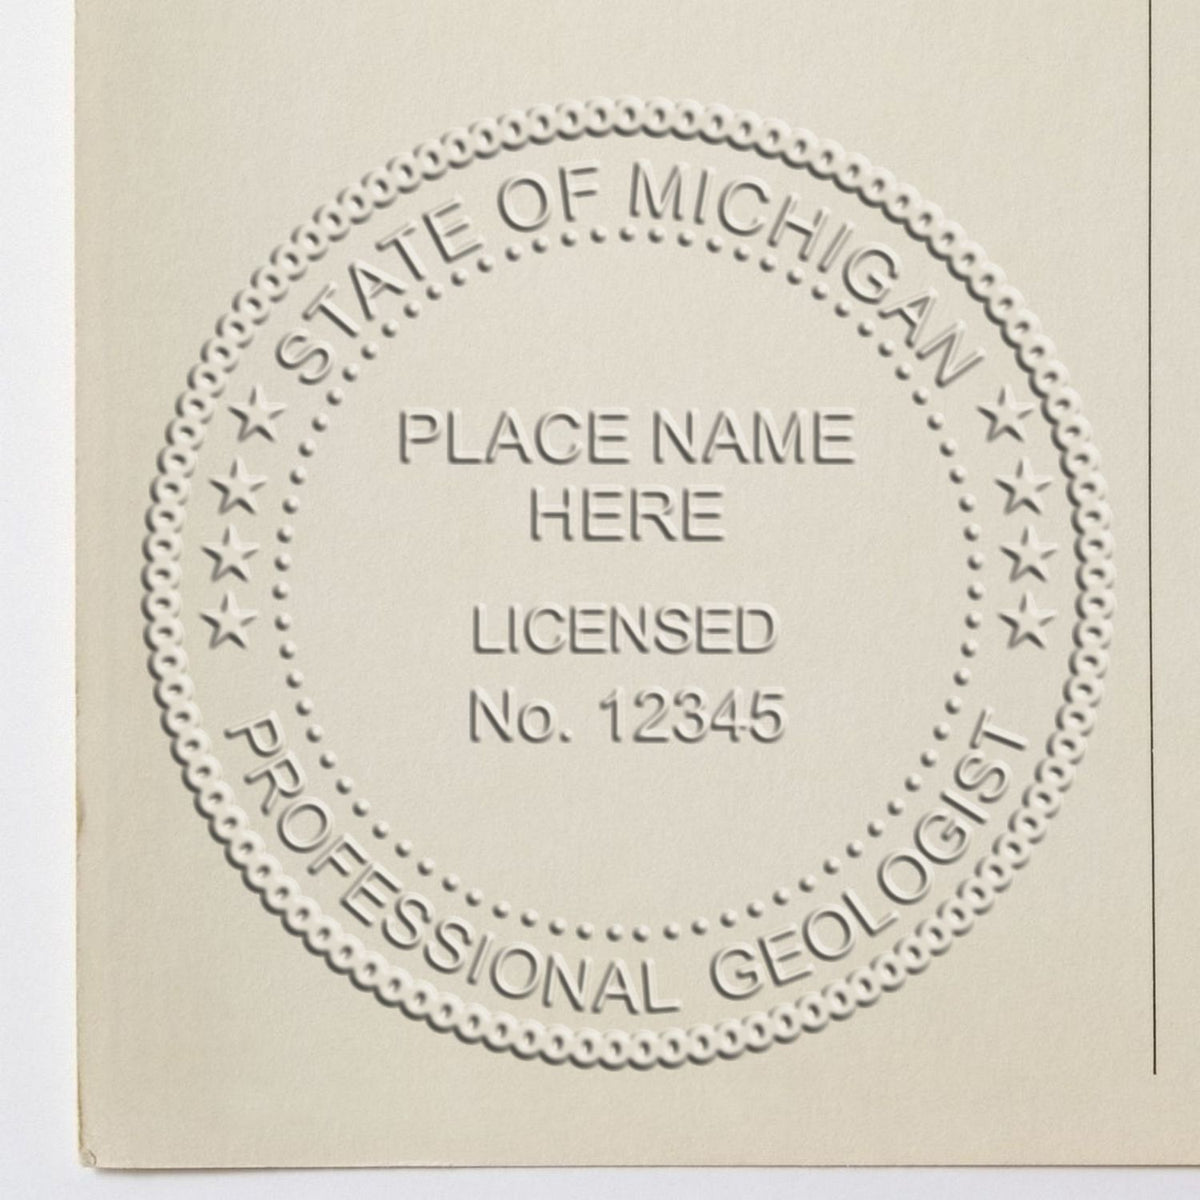 A lifestyle photo showing a stamped image of the Handheld Michigan Professional Geologist Embosser on a piece of paper